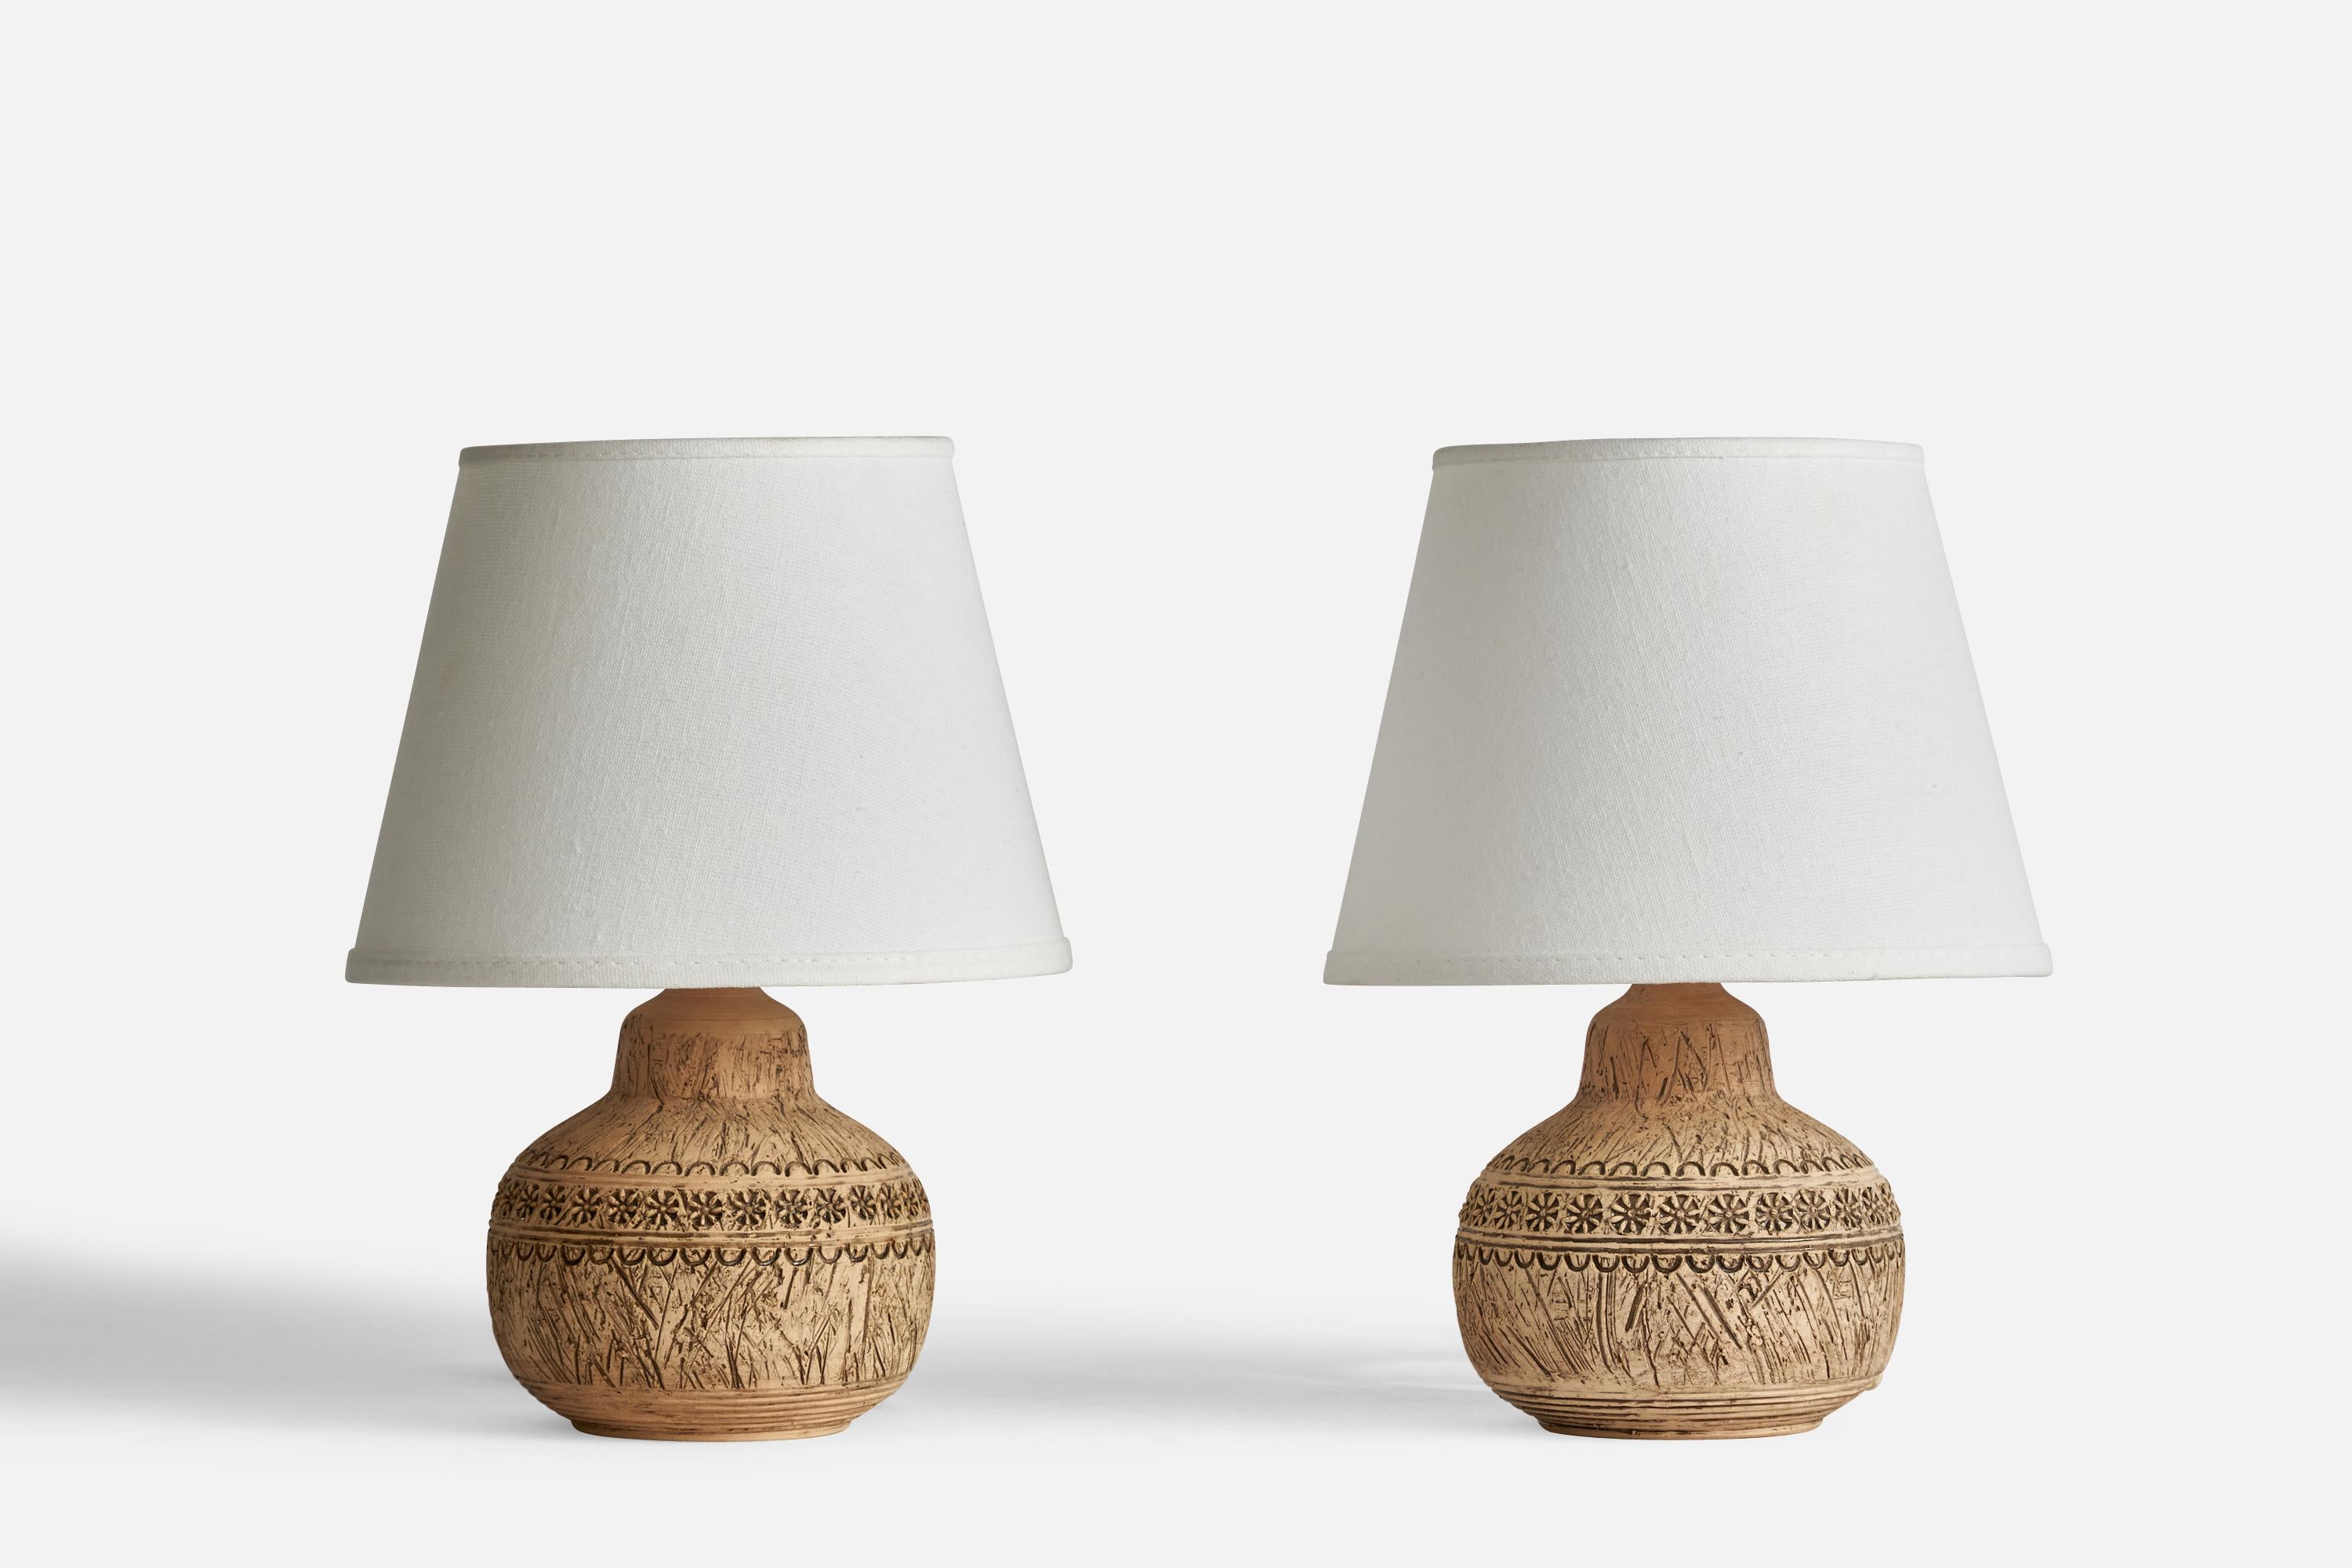 A pair of table lamps designed and produced by Keramik Olle, Gränna, Sweden, c. 1960s.

Dimensions of Lamp (inches): 7.25” H x 5” Diameter
Dimensions of Shade (inches): 5.25” Top Diameter x 8” Bottom Diameter x 6” H
Dimensions of Lamp with Shade